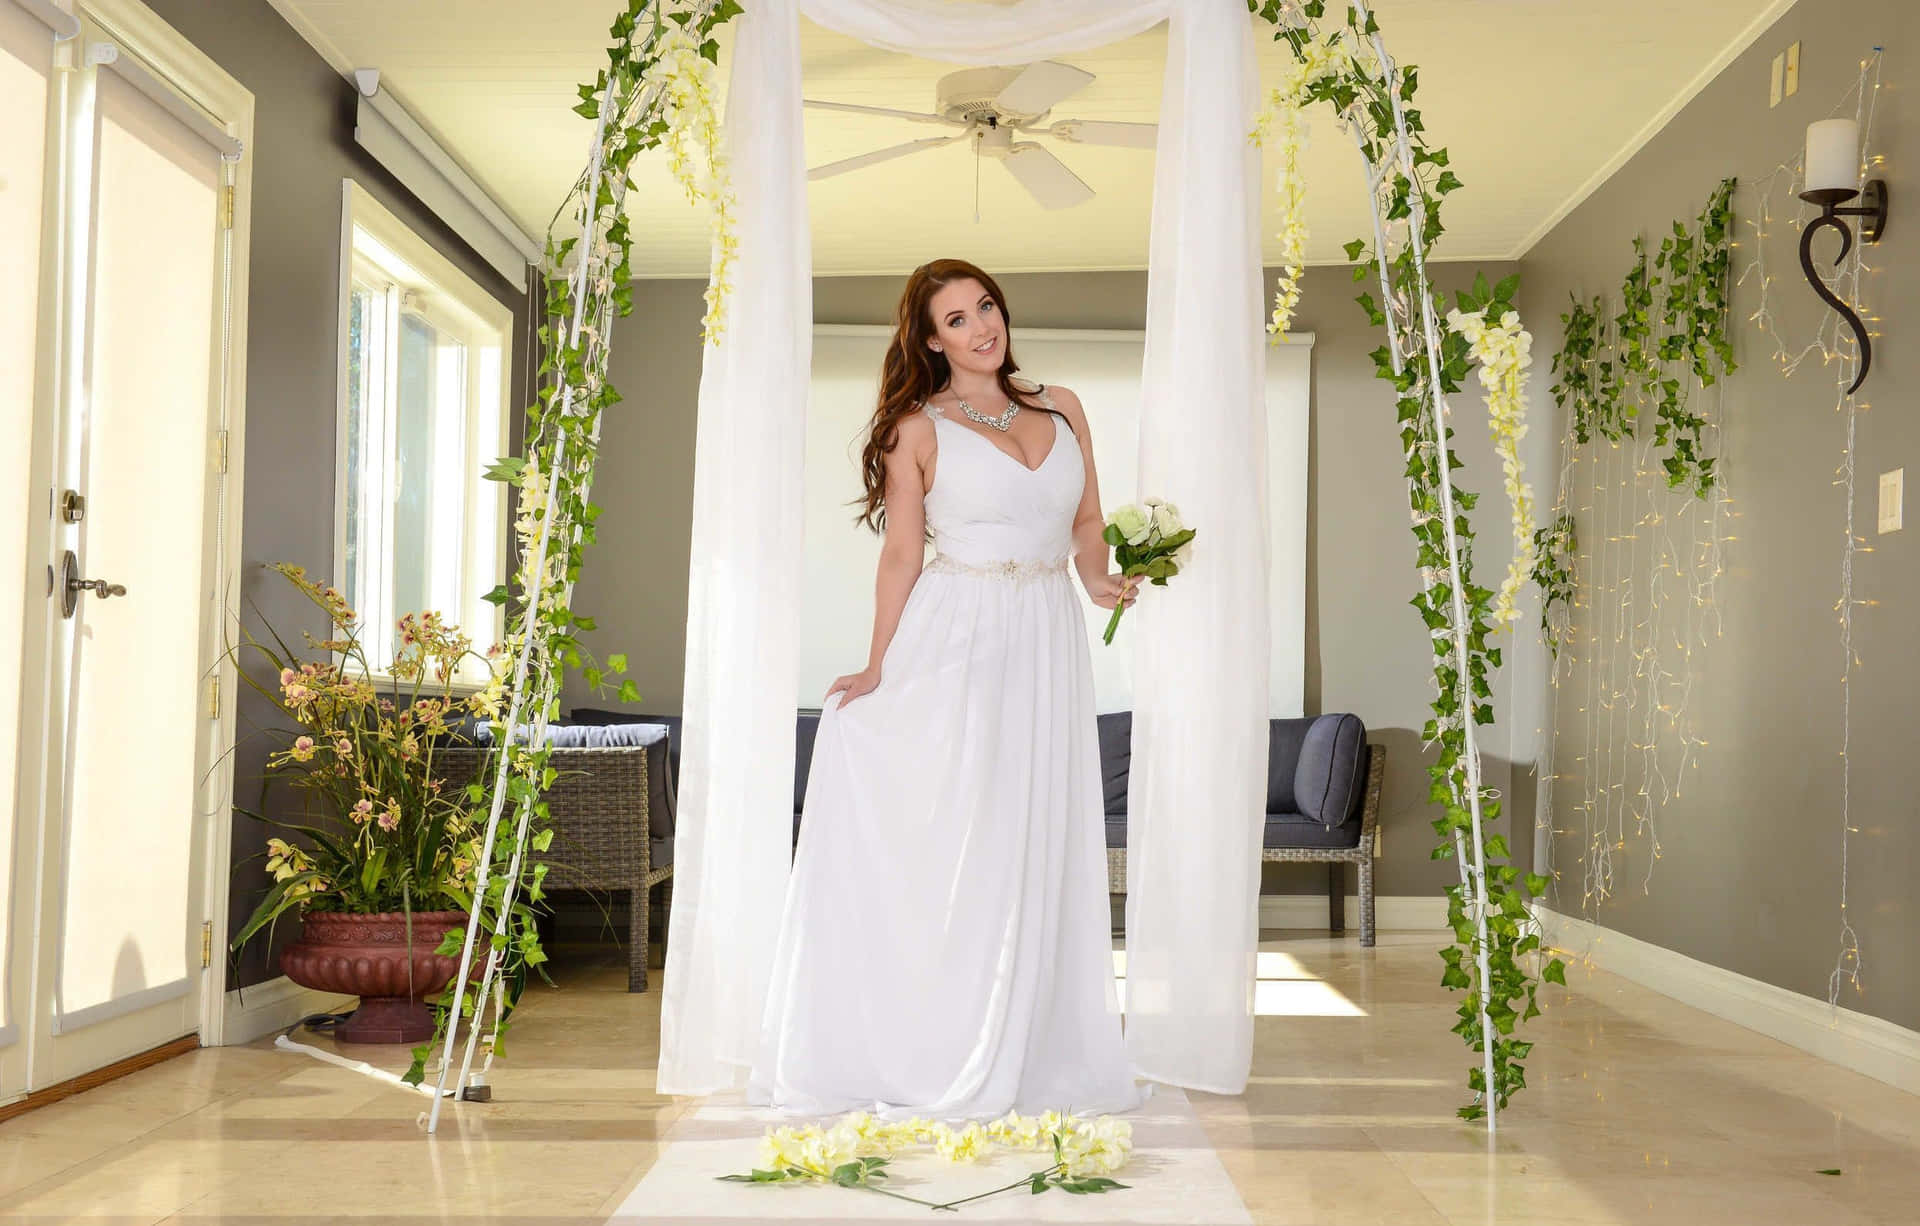 Look stunning on your special day with the perfect bridal look